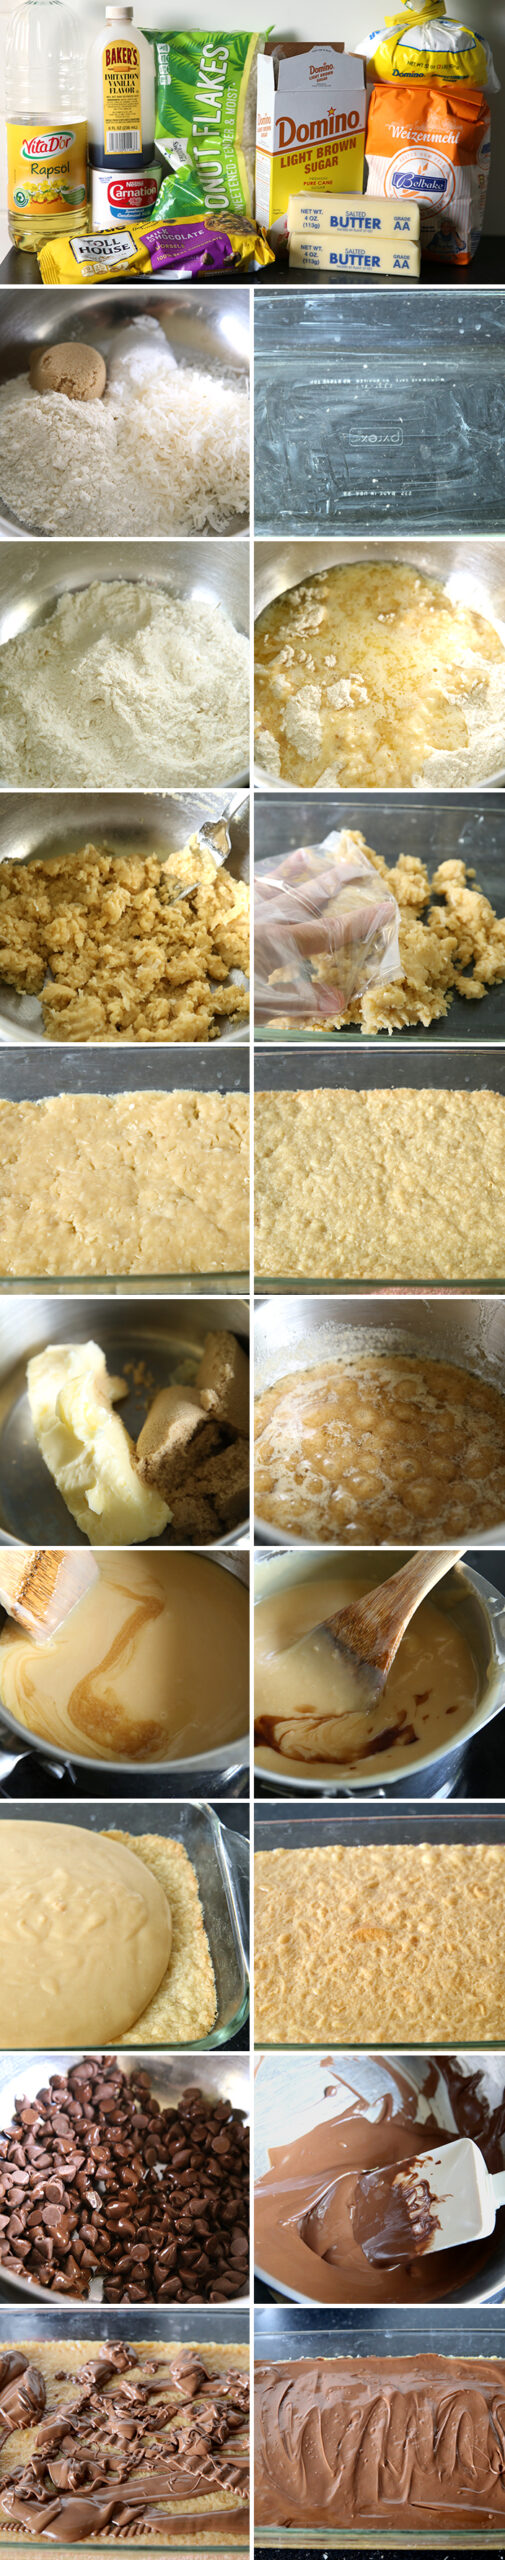 19-photo picture collage of step-by-step pictures of how to make Chocolate Caramel Slice